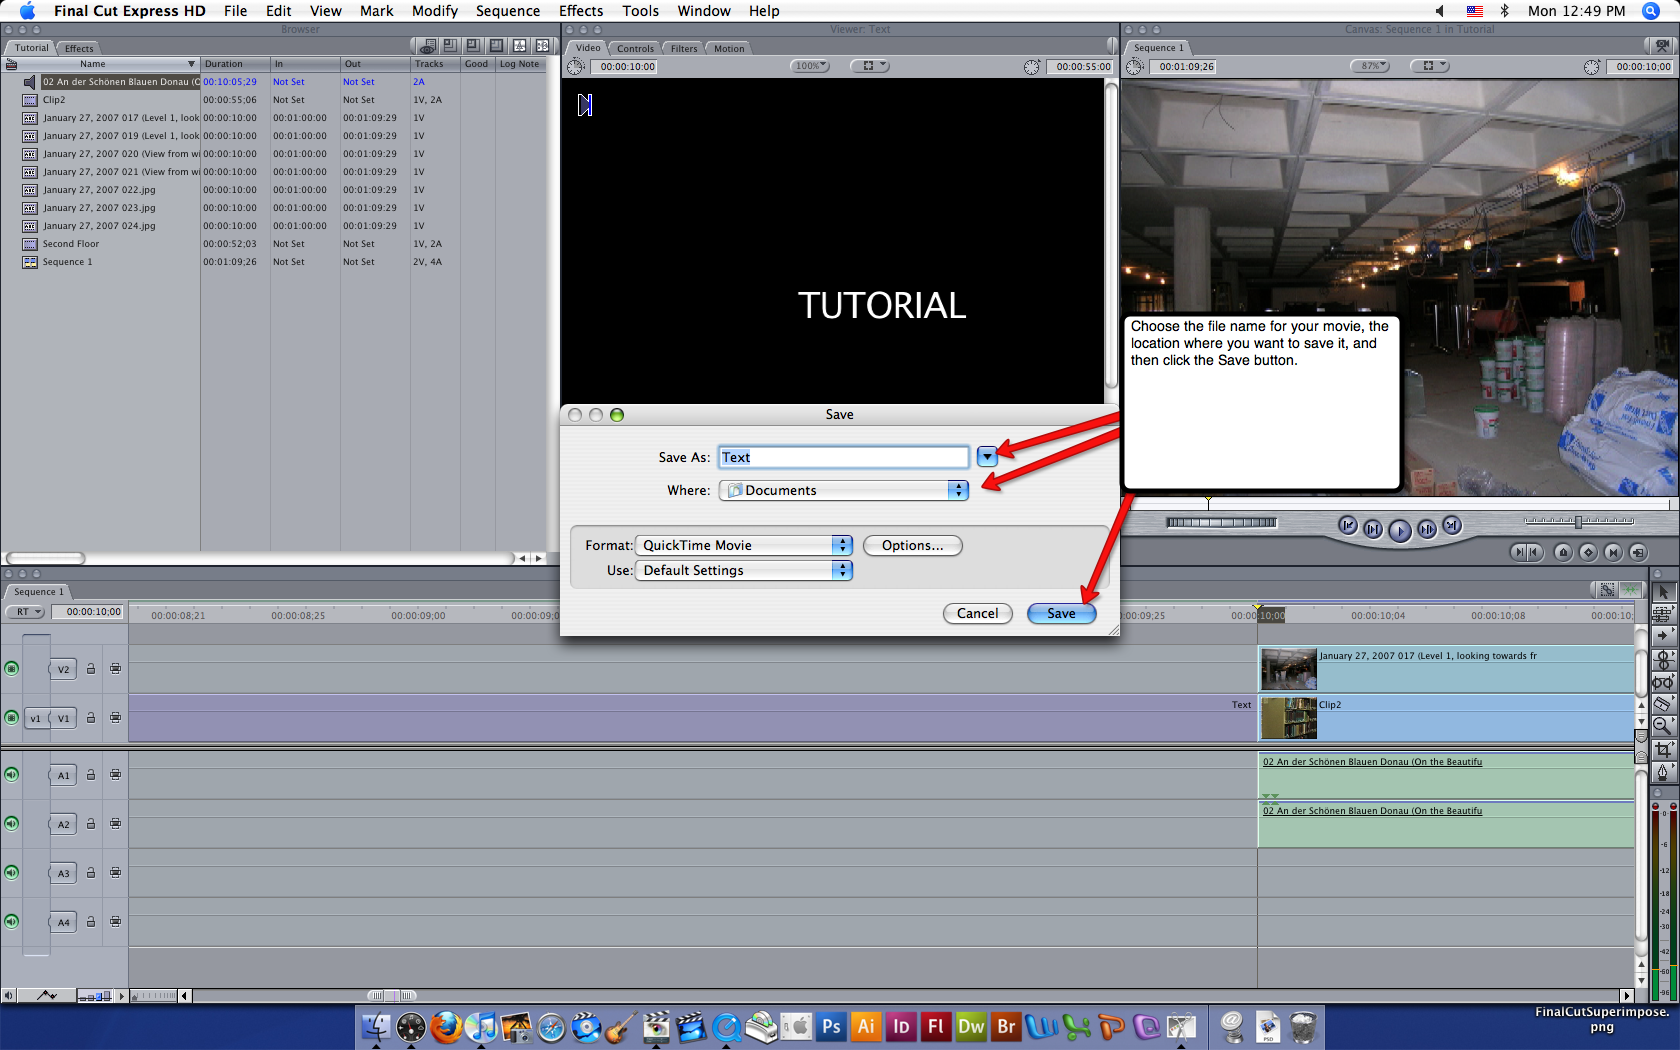 Visual guide to saving movies in Final Cut Express HD step 2.